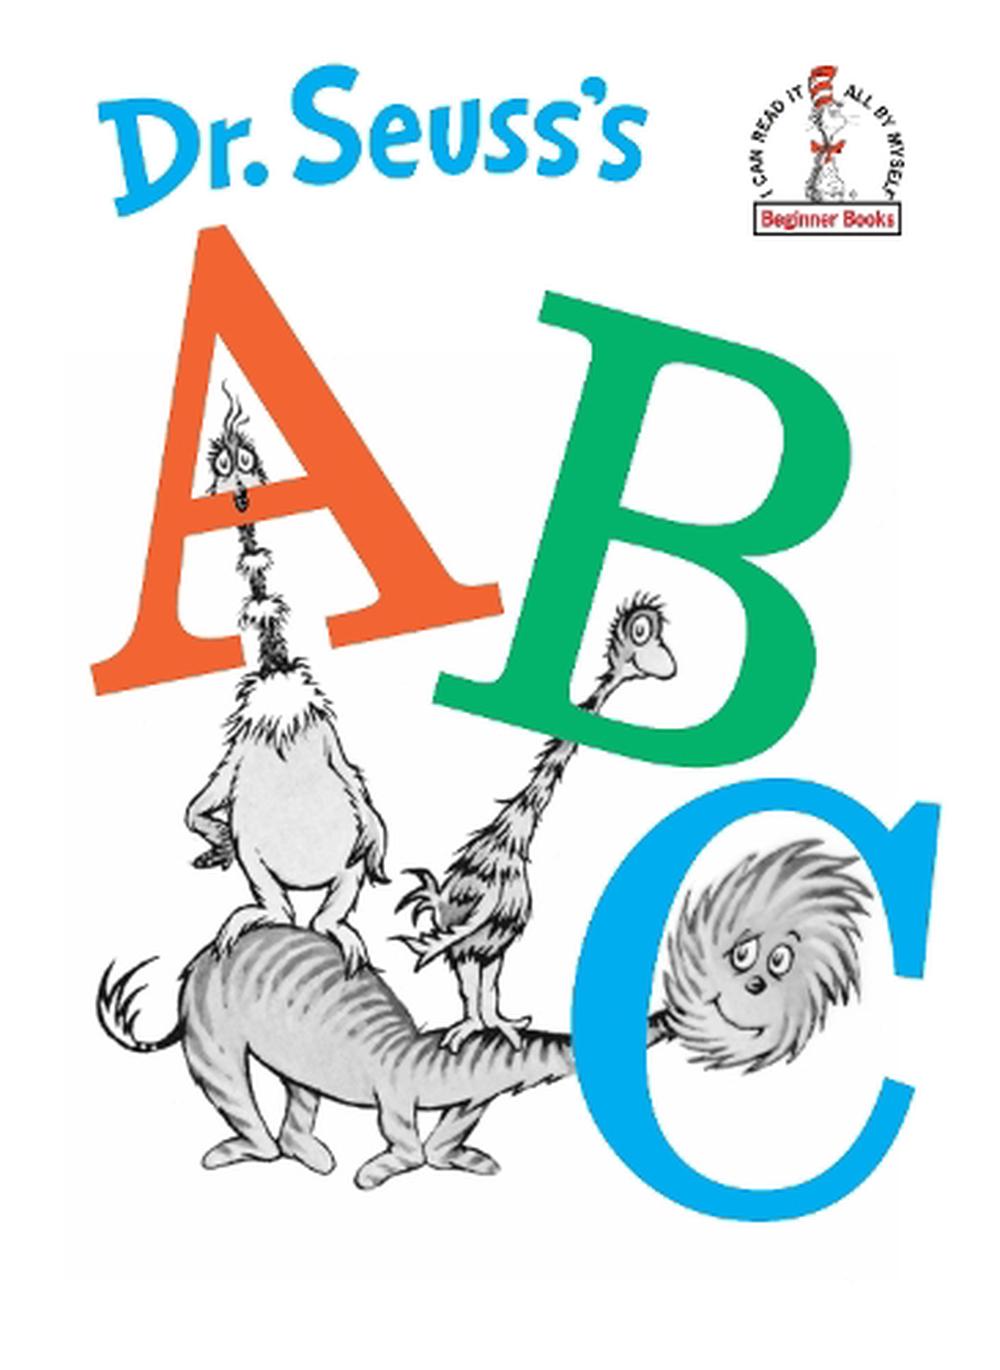 Dr. Seuss's ABC by Dr Seuss (English) Hardcover Book Free Shipping ...